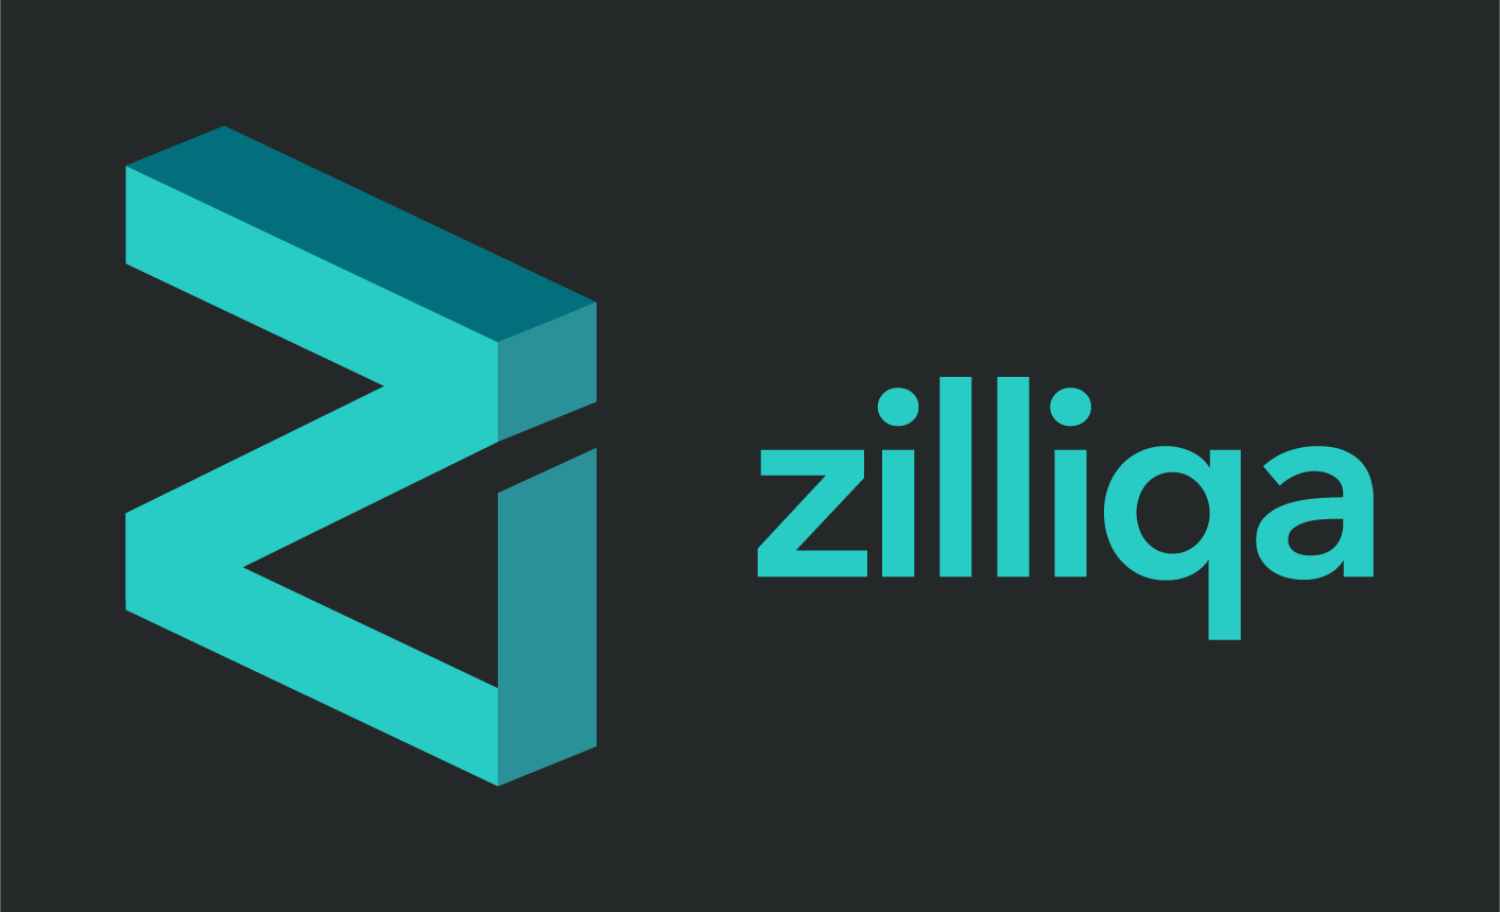 Zilliqa forms a Strong Alternative to Market Leader Ethereum – Report